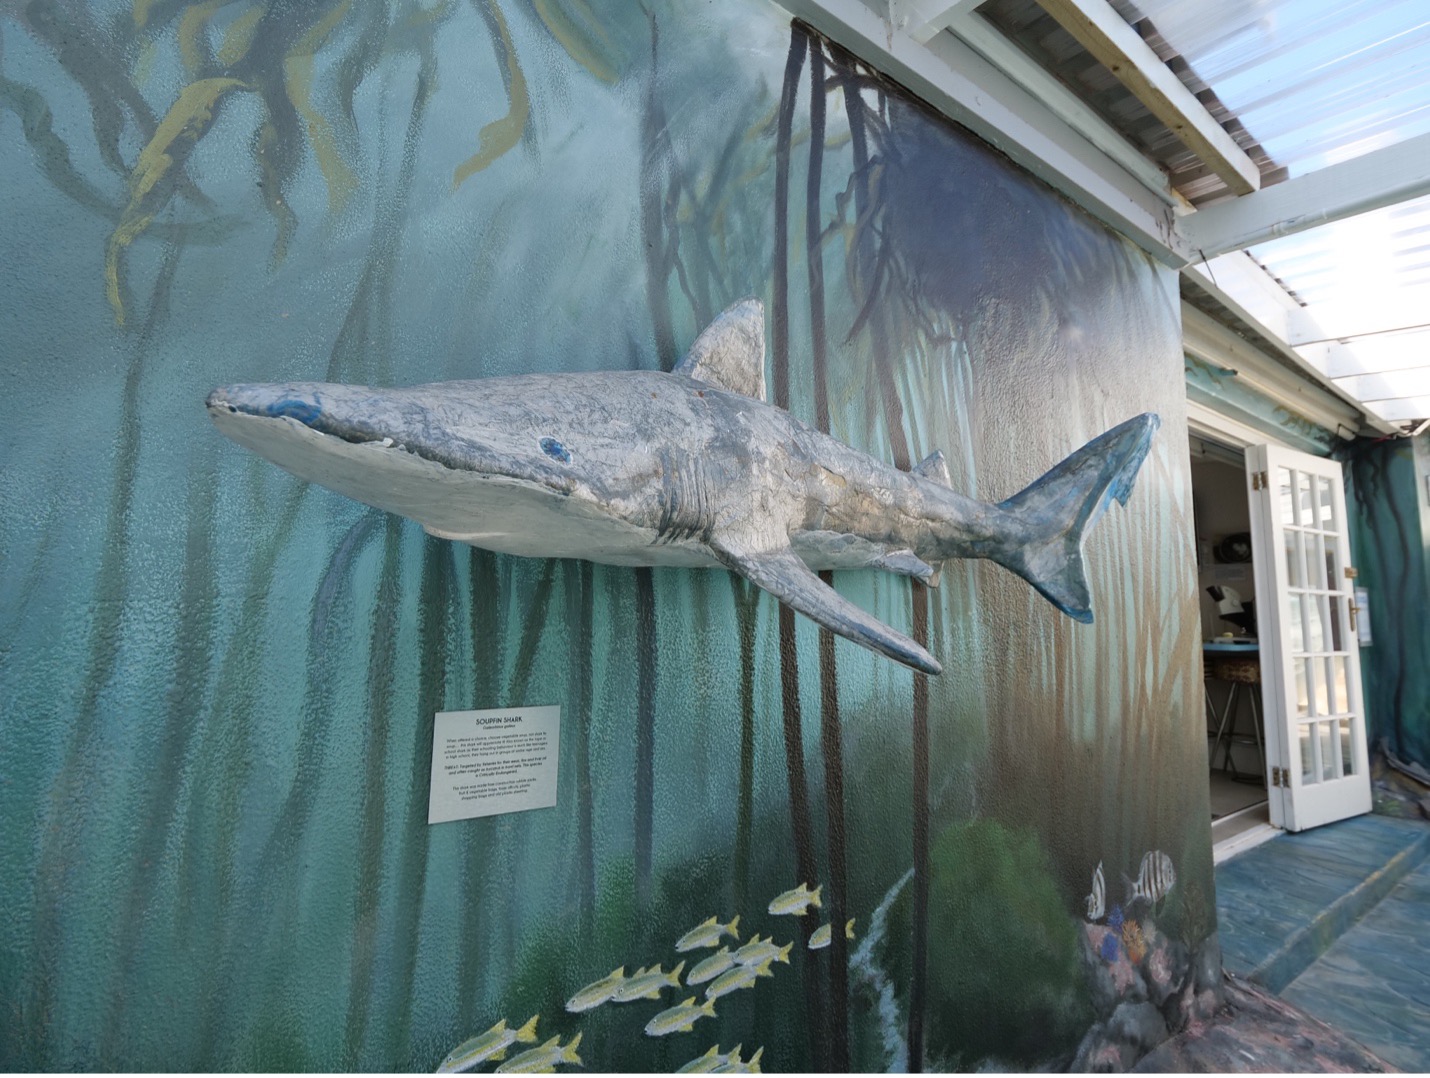 With so much life within our kelp forest, our centre’s unique art installations aim to showcase the true diversity of life along our coast. Image by SOSF Shark Education Centre.